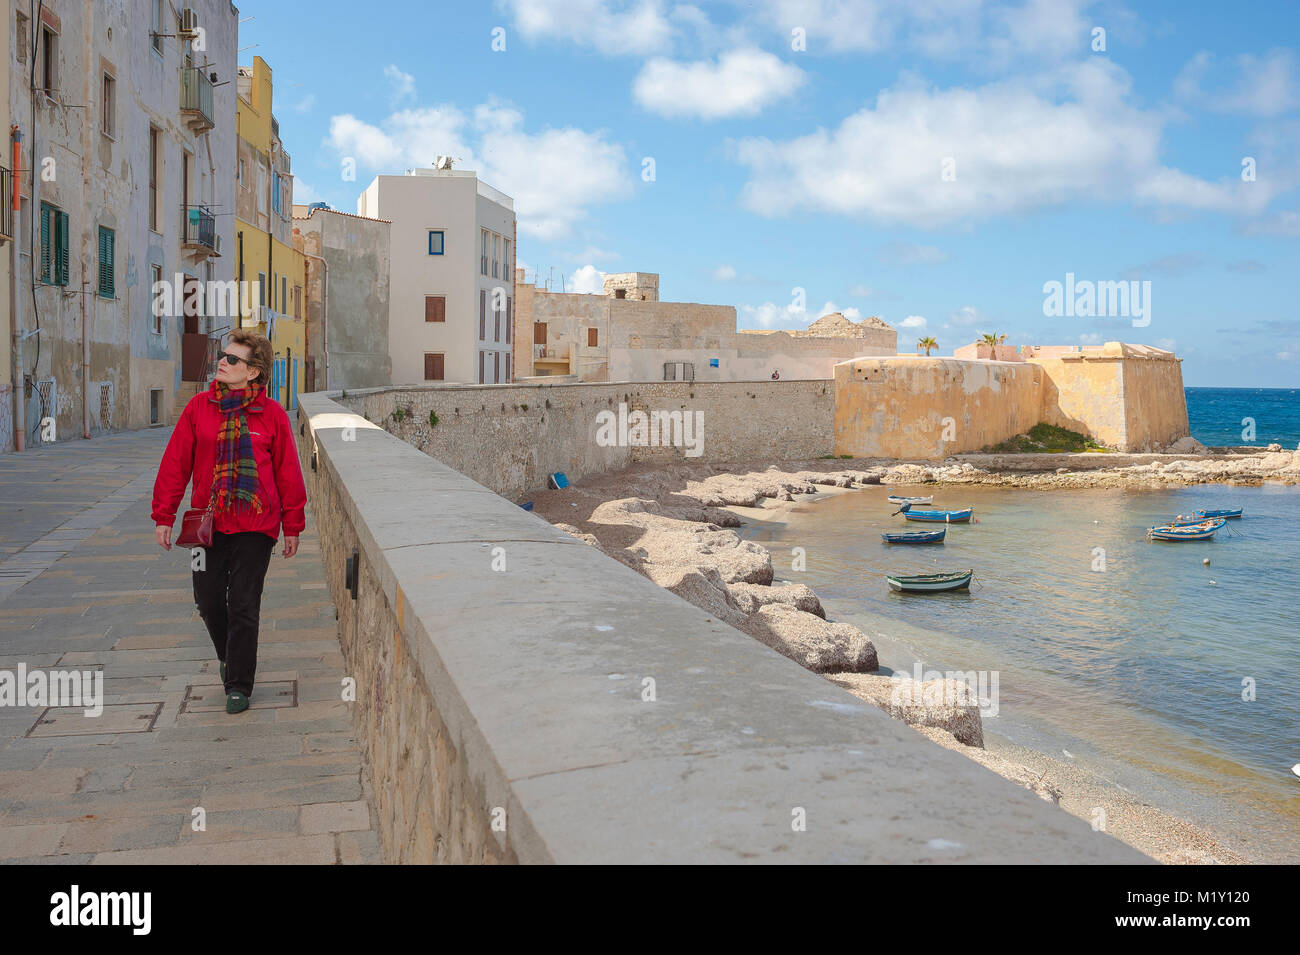 Woman solo tourist alone concept, view of a mature woman traveler walking along the sea wall on the north shore of Trapani, Sicily. [MODEL RELEASED] Stock Photo